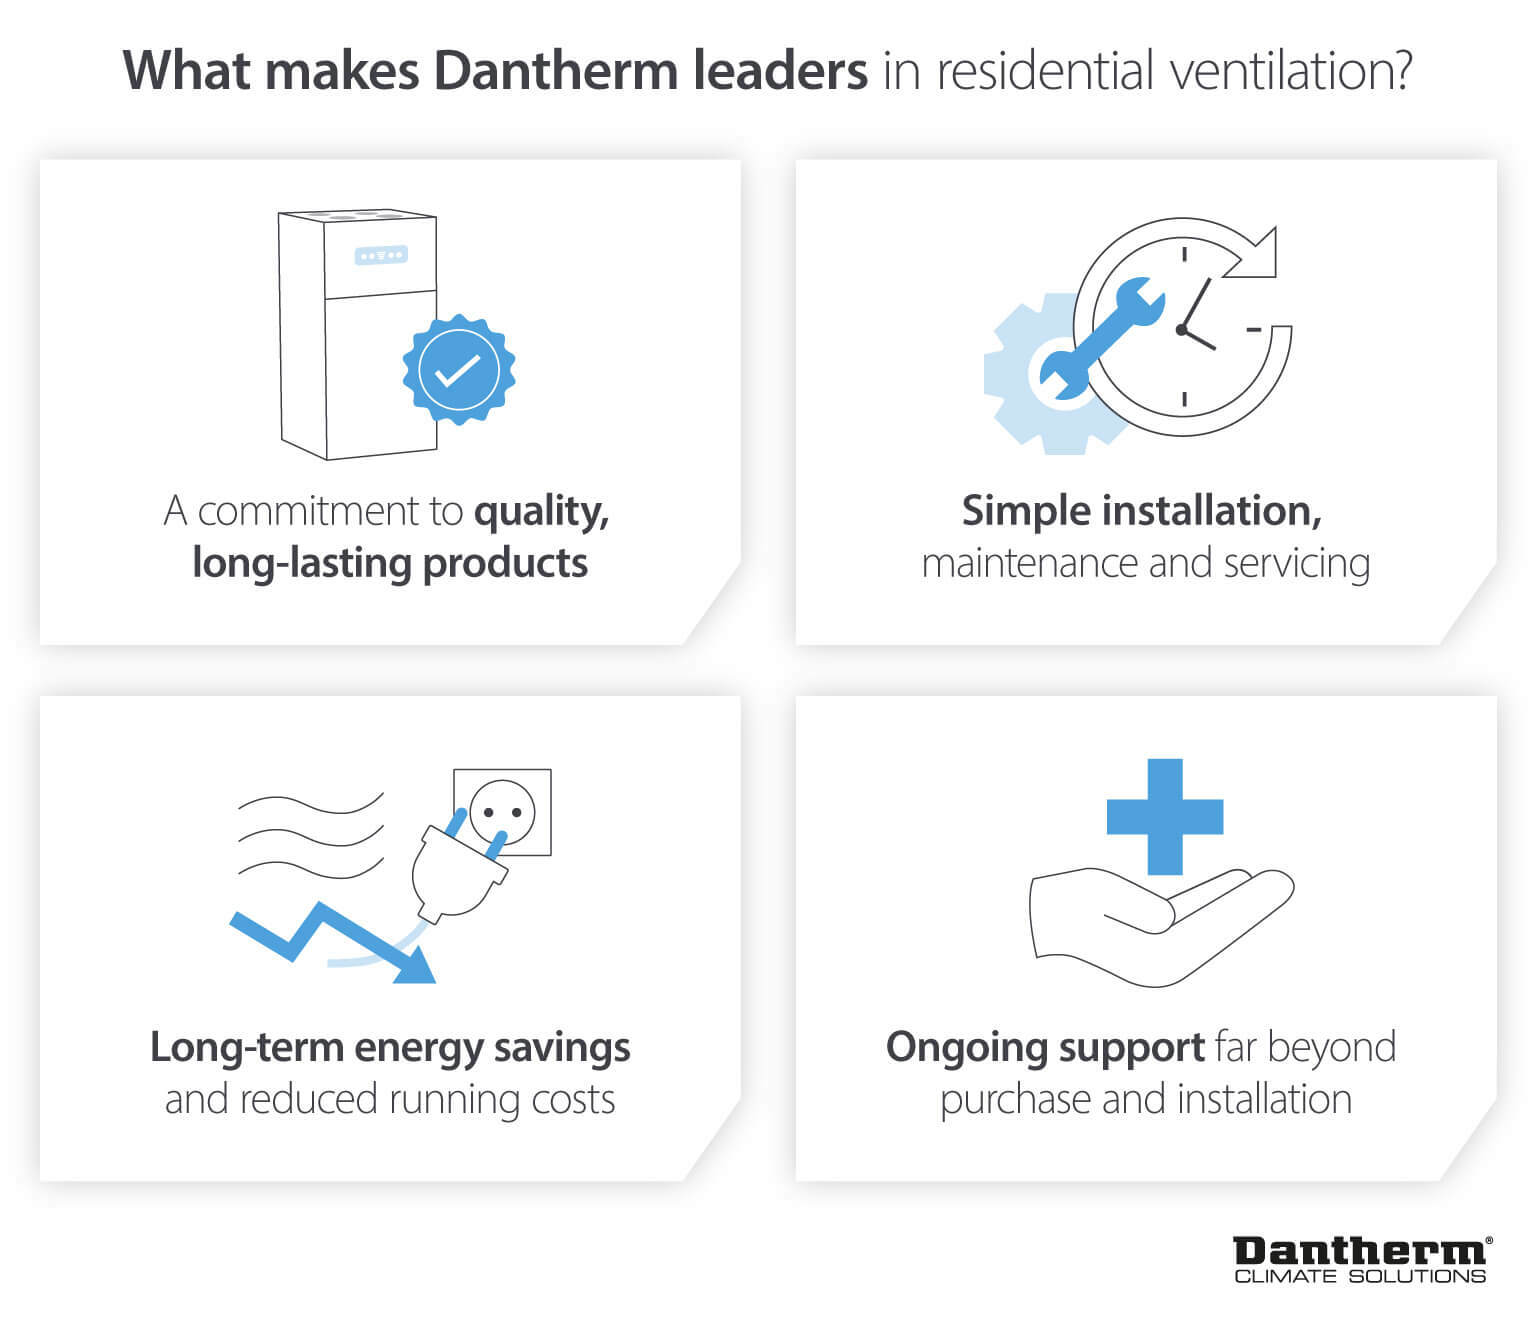 What makes Dantherm market leaders in residential ventilation through sustainable and high quality products and support - Infographic image